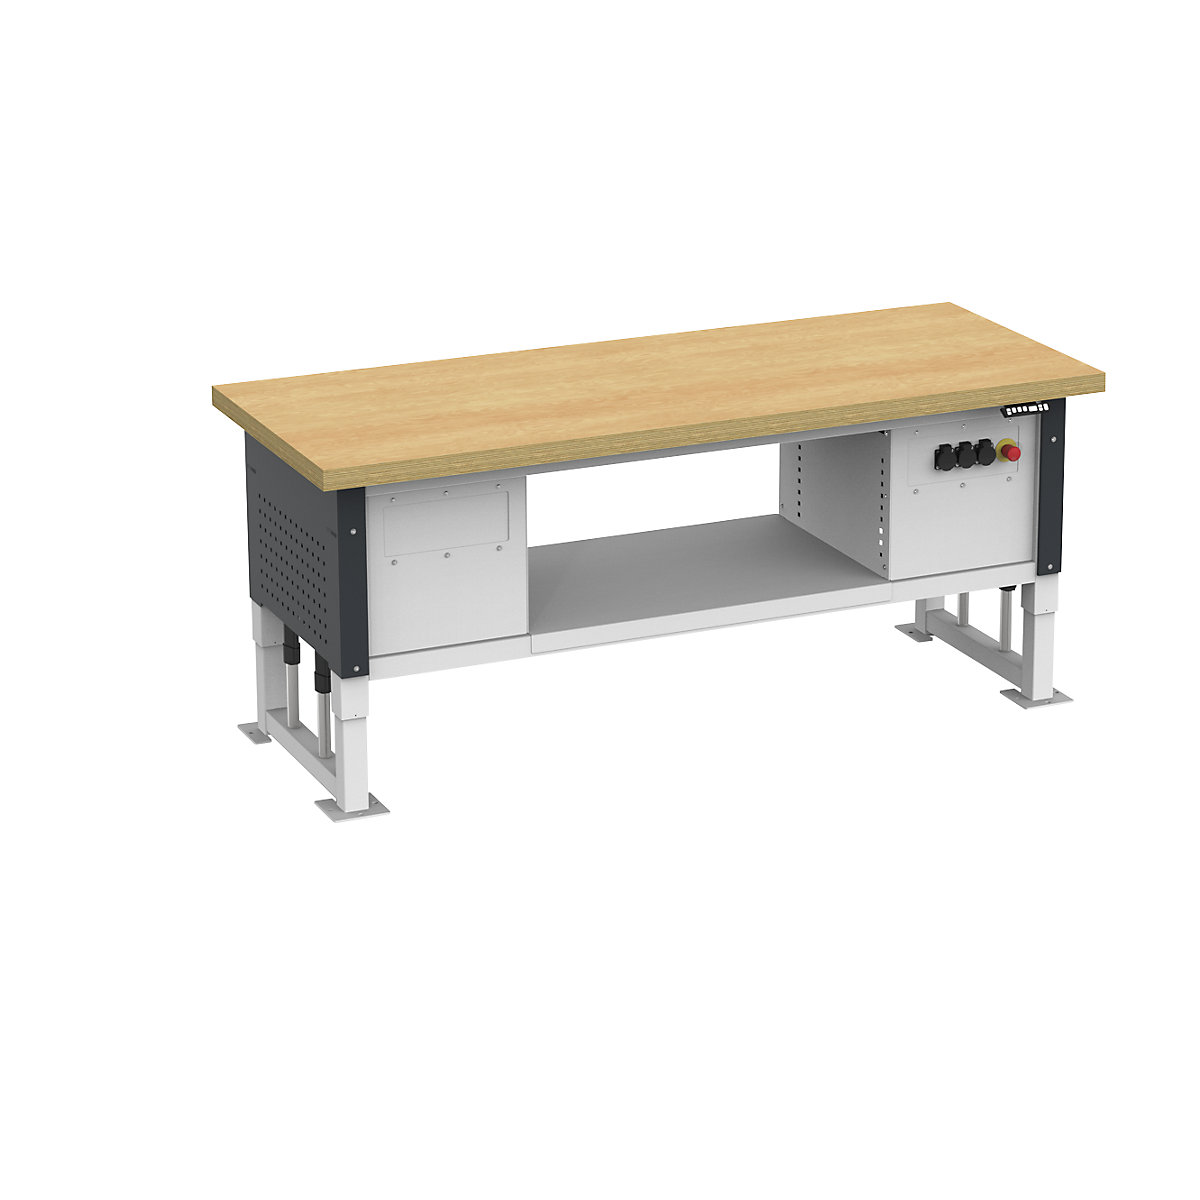 Heavy duty table, electrically height adjustable, worktop width 2030 mm, max. surface load 2000 kg, charcoal RAL 7016-1